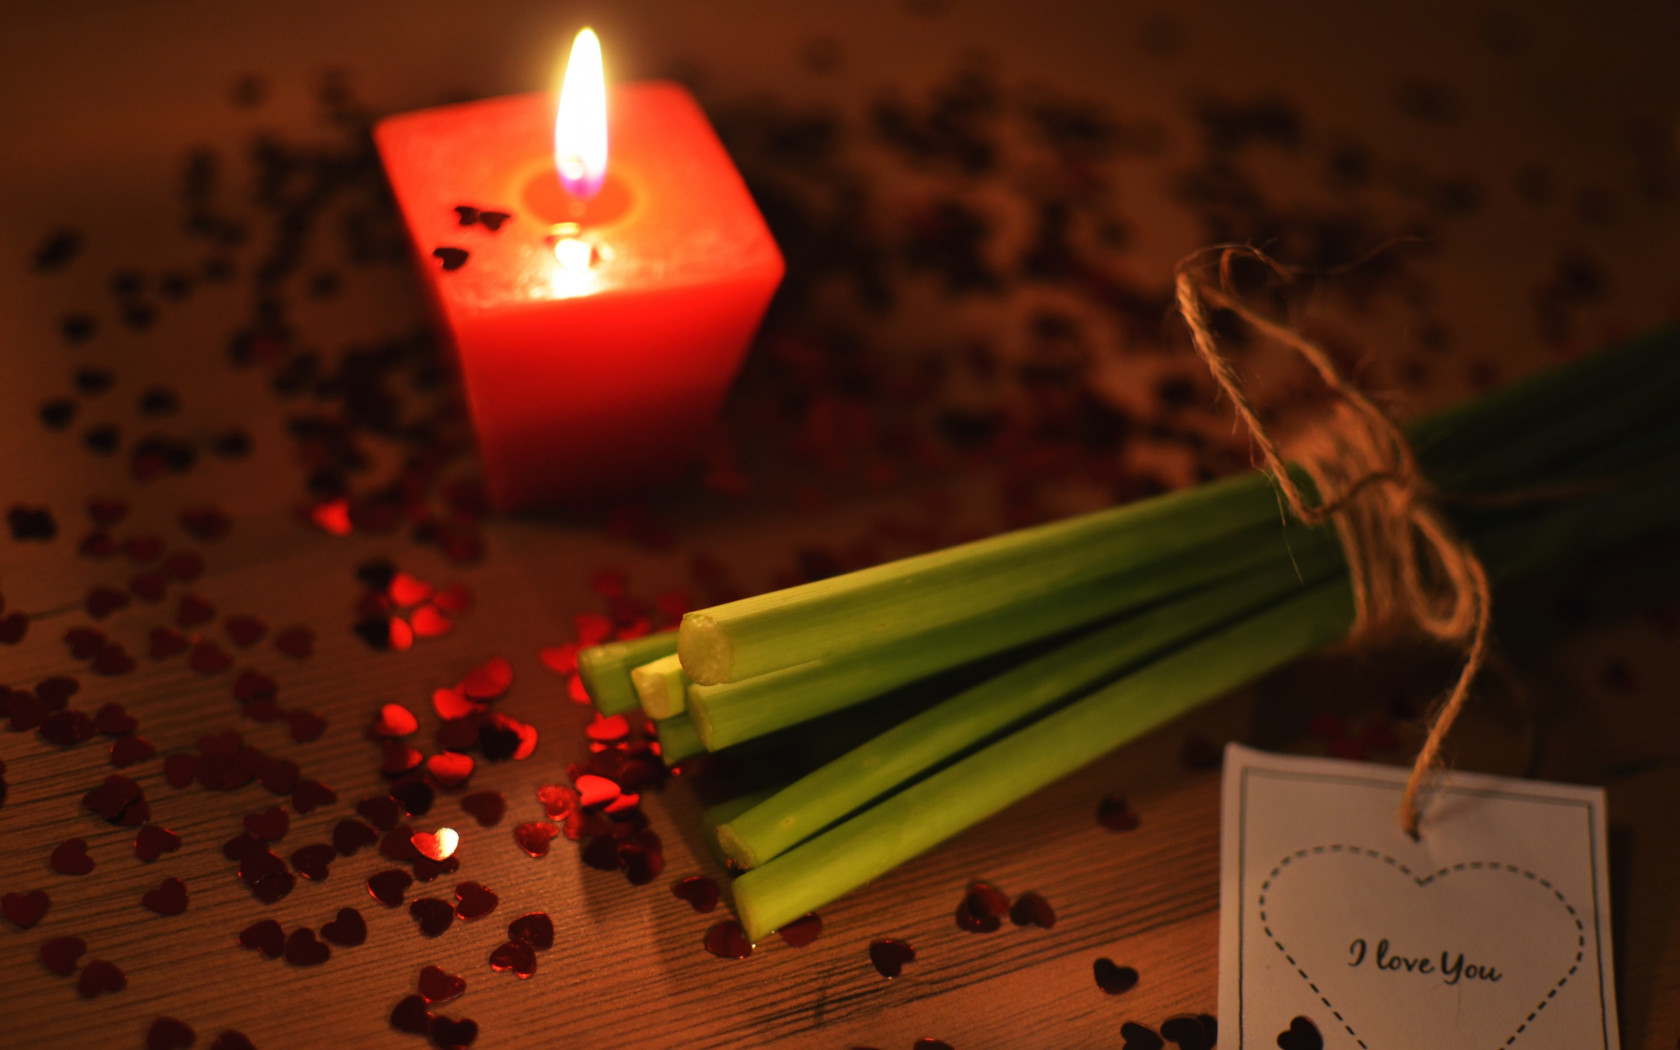 I love you, candlelight, romantic wallpaper 1680x1050